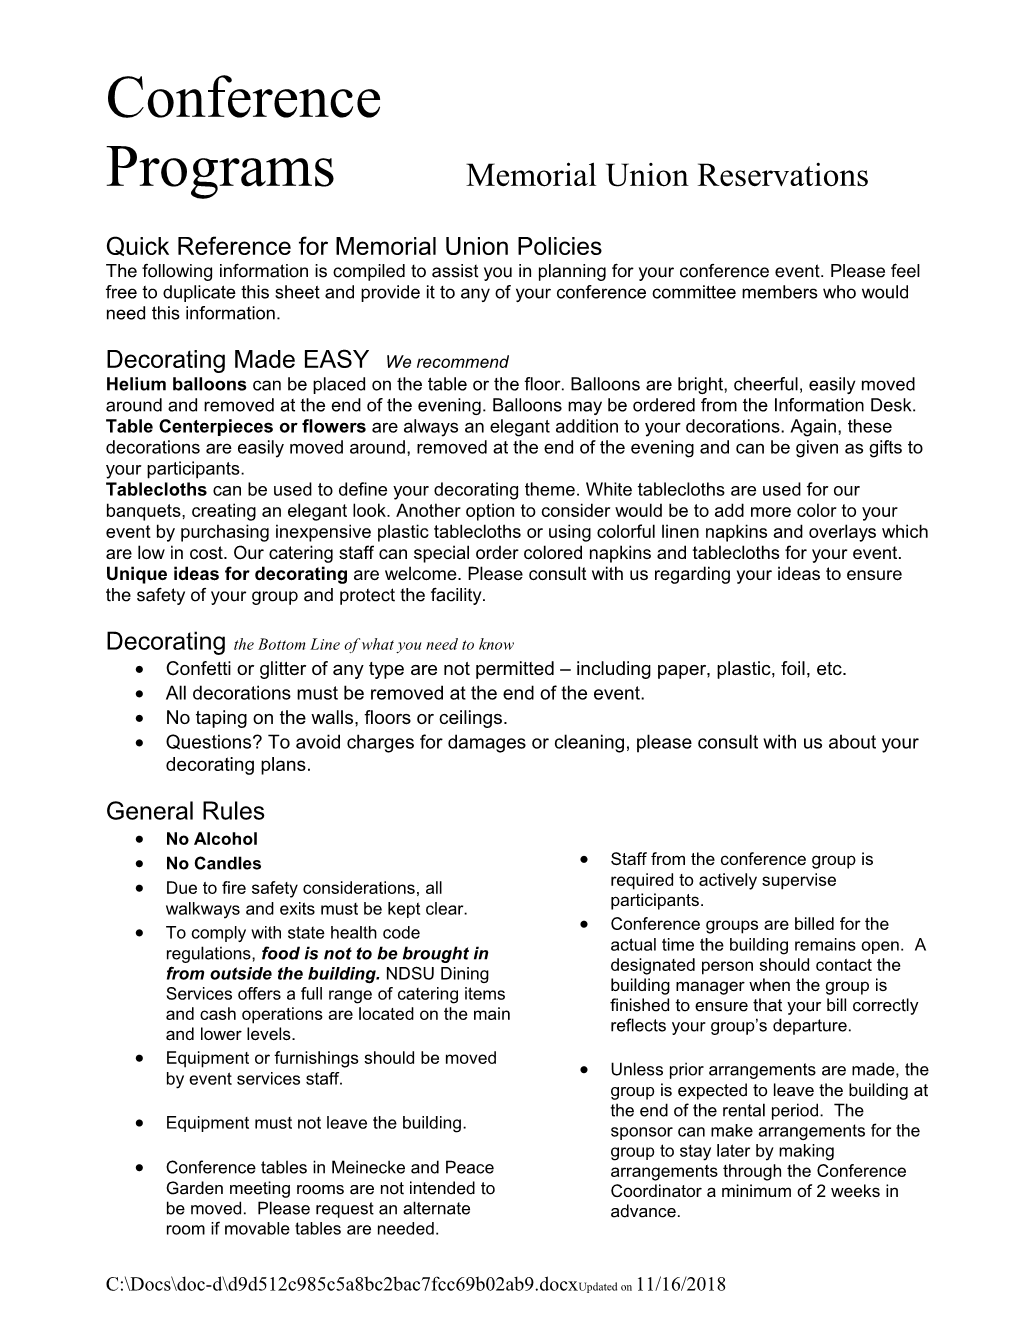 Memorial Union Policies for Conference Groups